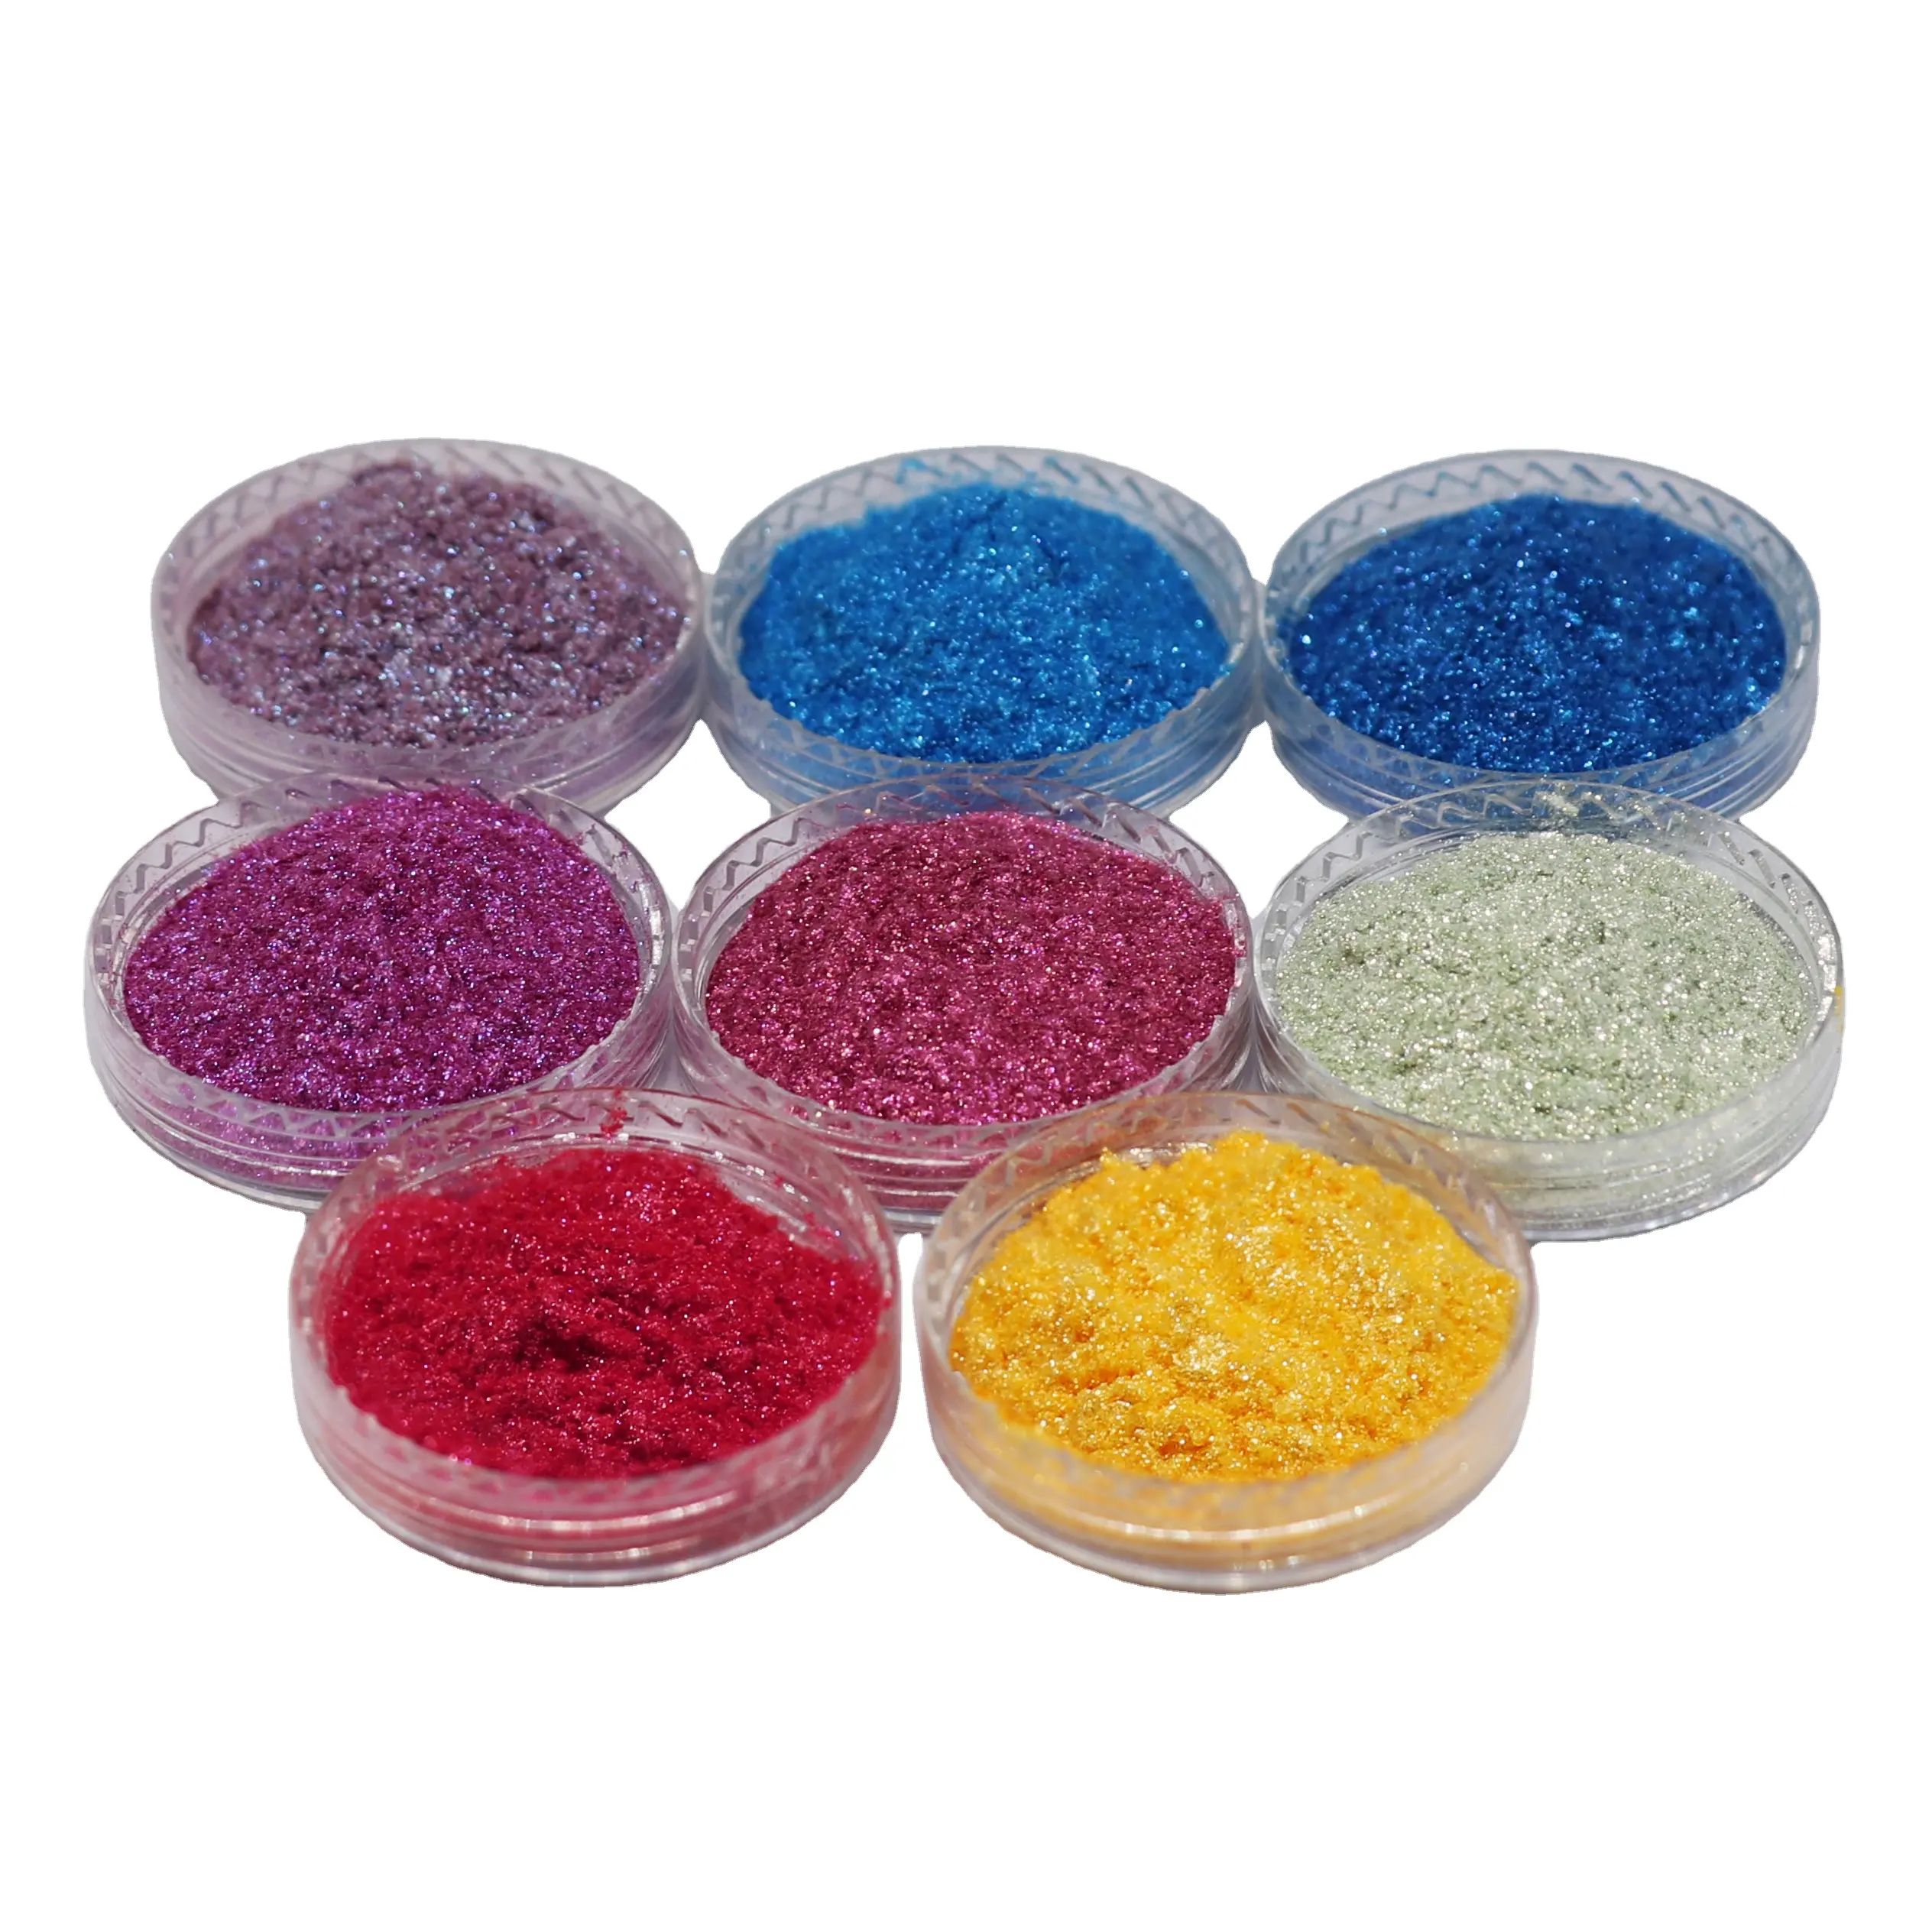 Hot Selling Epoxy Resin Diamond Pearl Pigment Colored Mica Powder Pigment for Soap Making